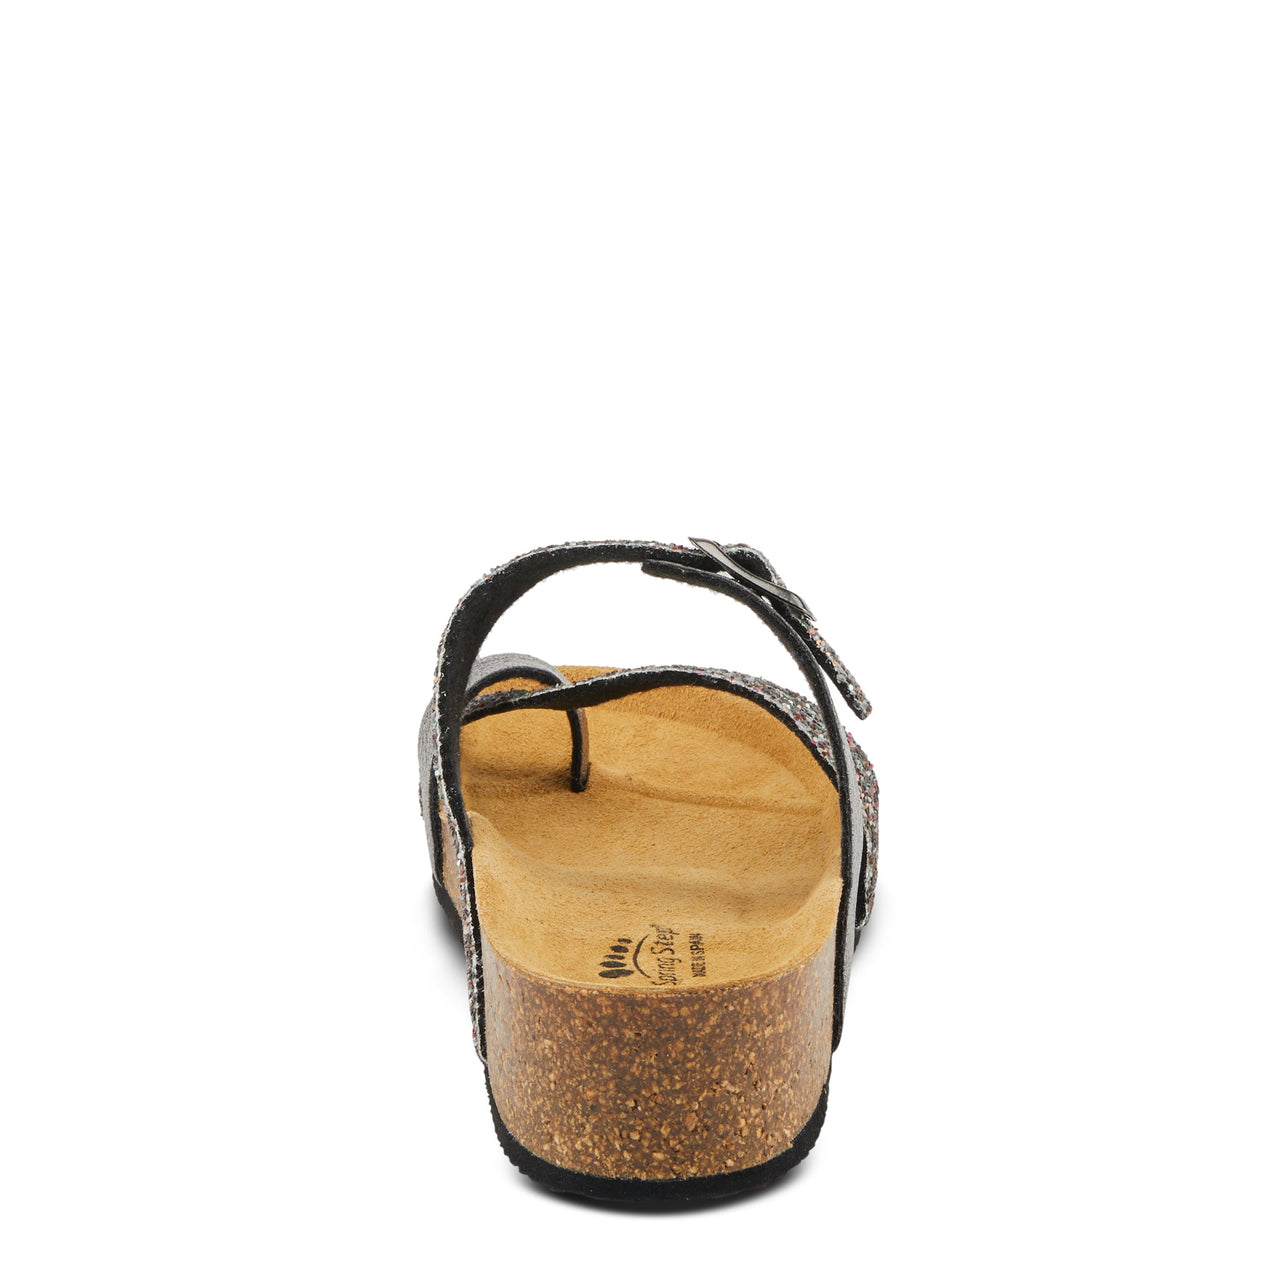 Spring Step Burch Sandals in bronze leather with anatomical cushioned insoles and arch support